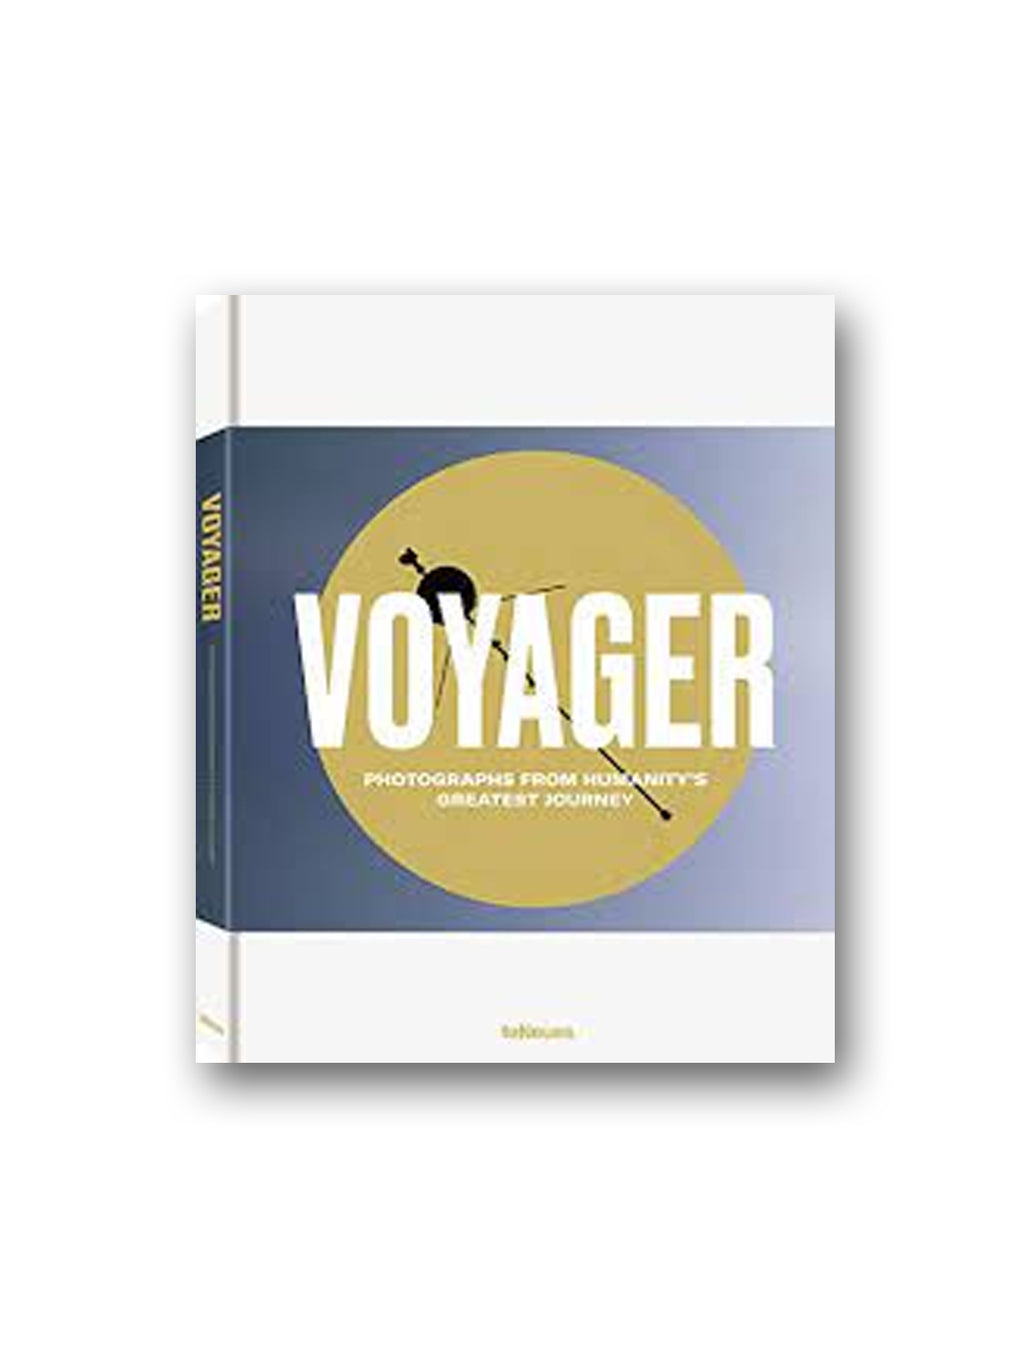 Voyager : Photograph's from Humanity's Greatest Journey